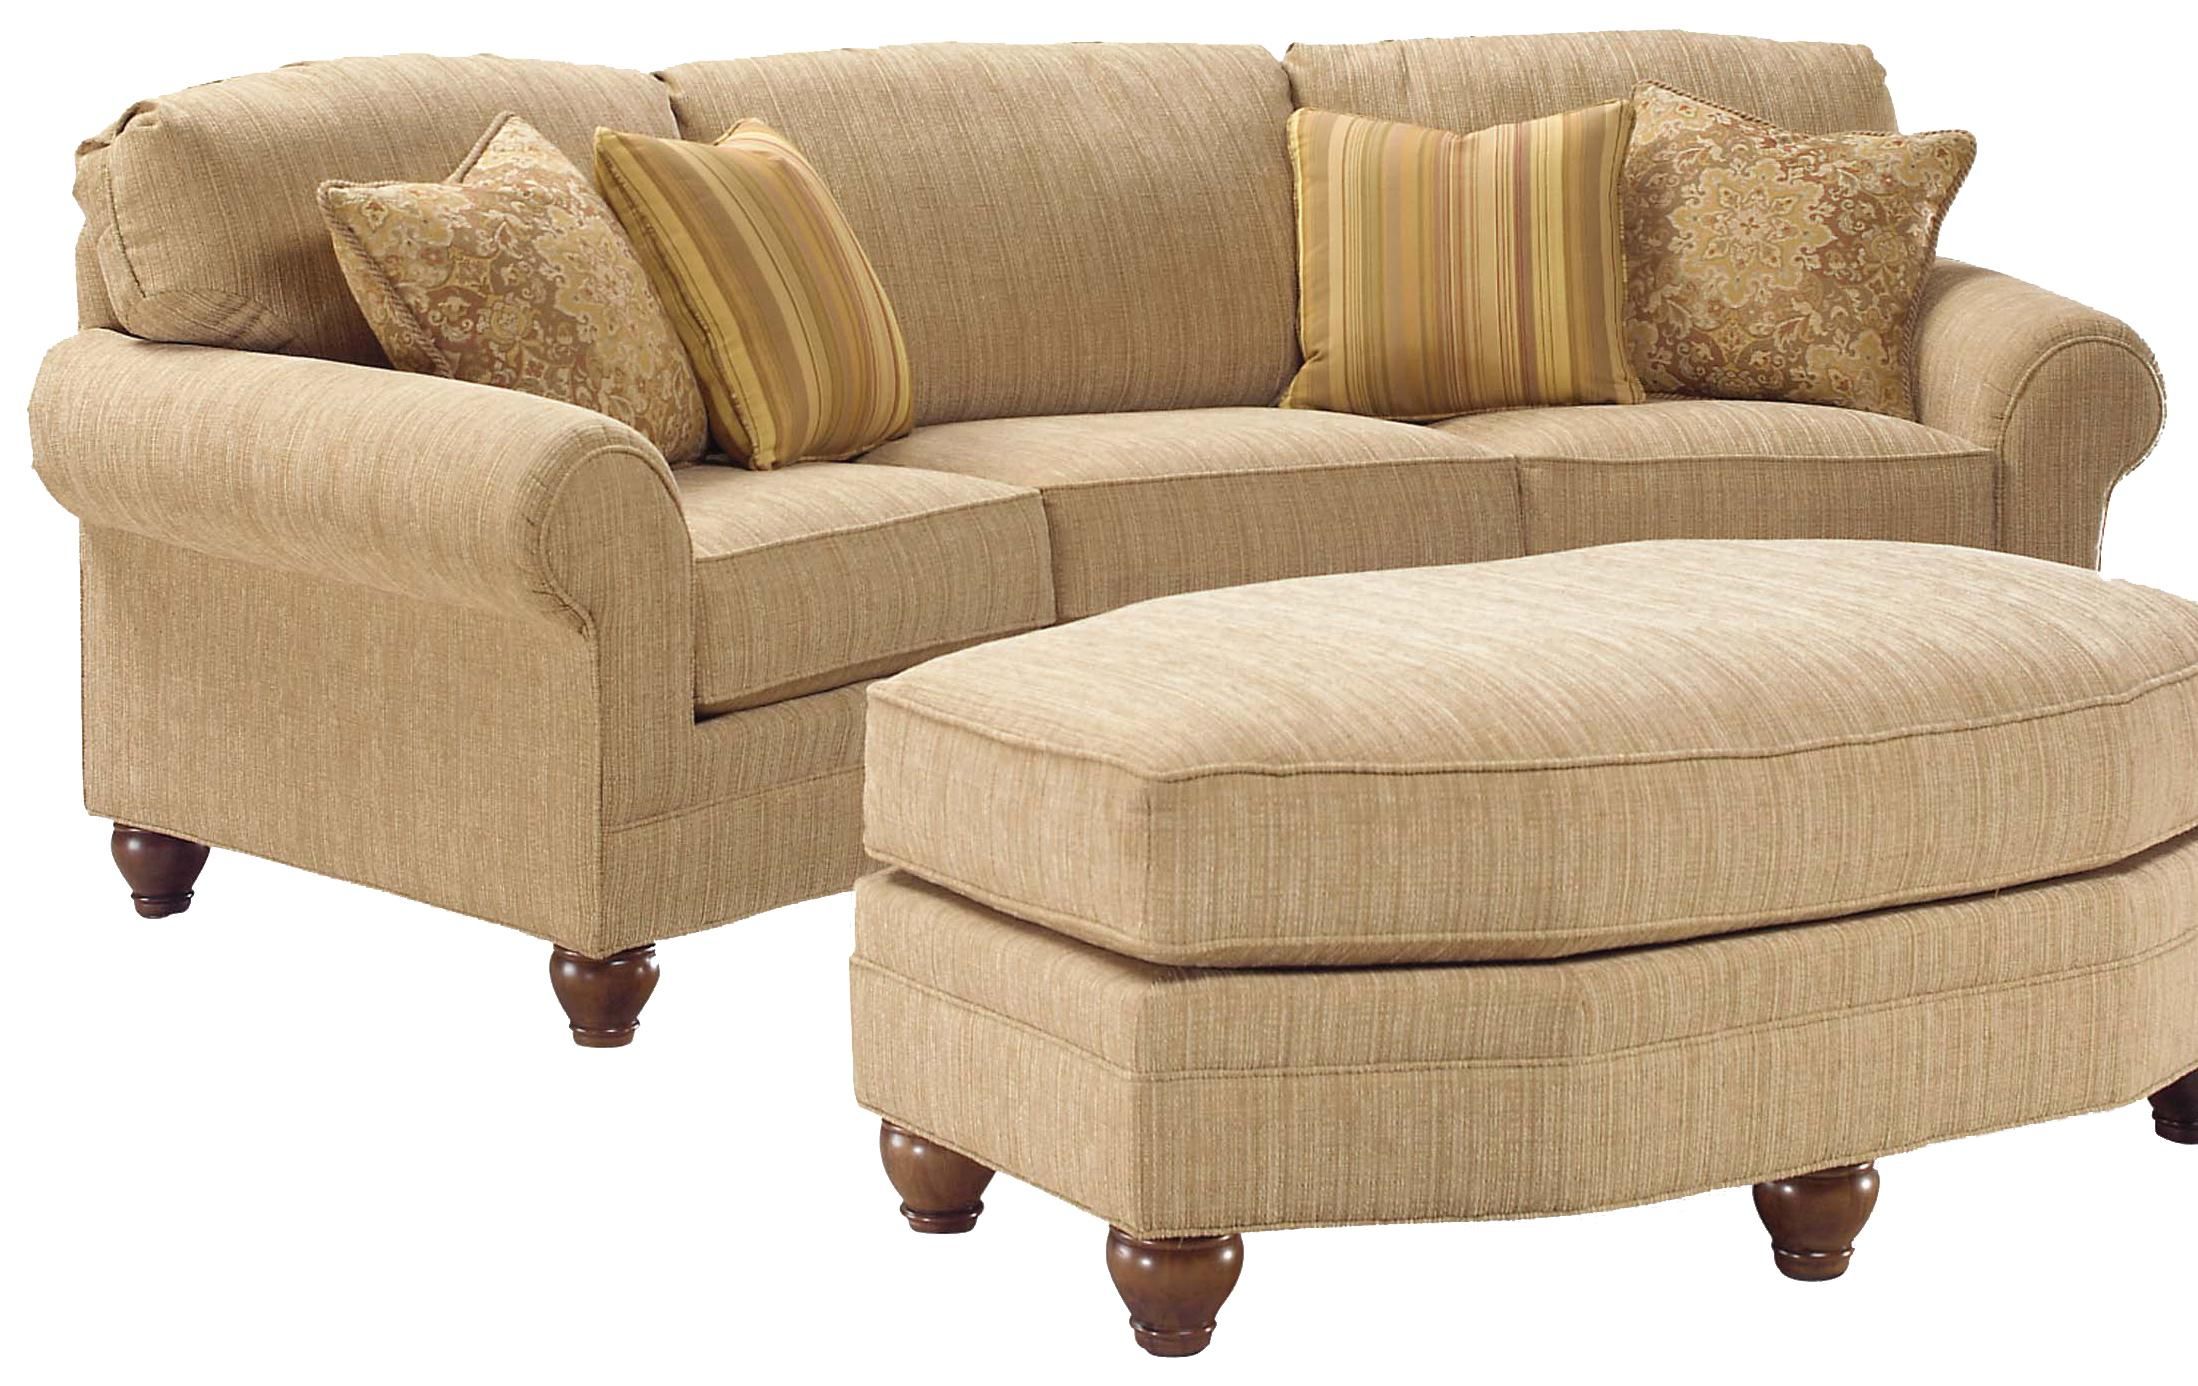 Fairfield 3768 3768 57 Curved Arch Sofa | Upper Room Home Furnishings Within Sofas With Curved Arms (View 11 of 20)